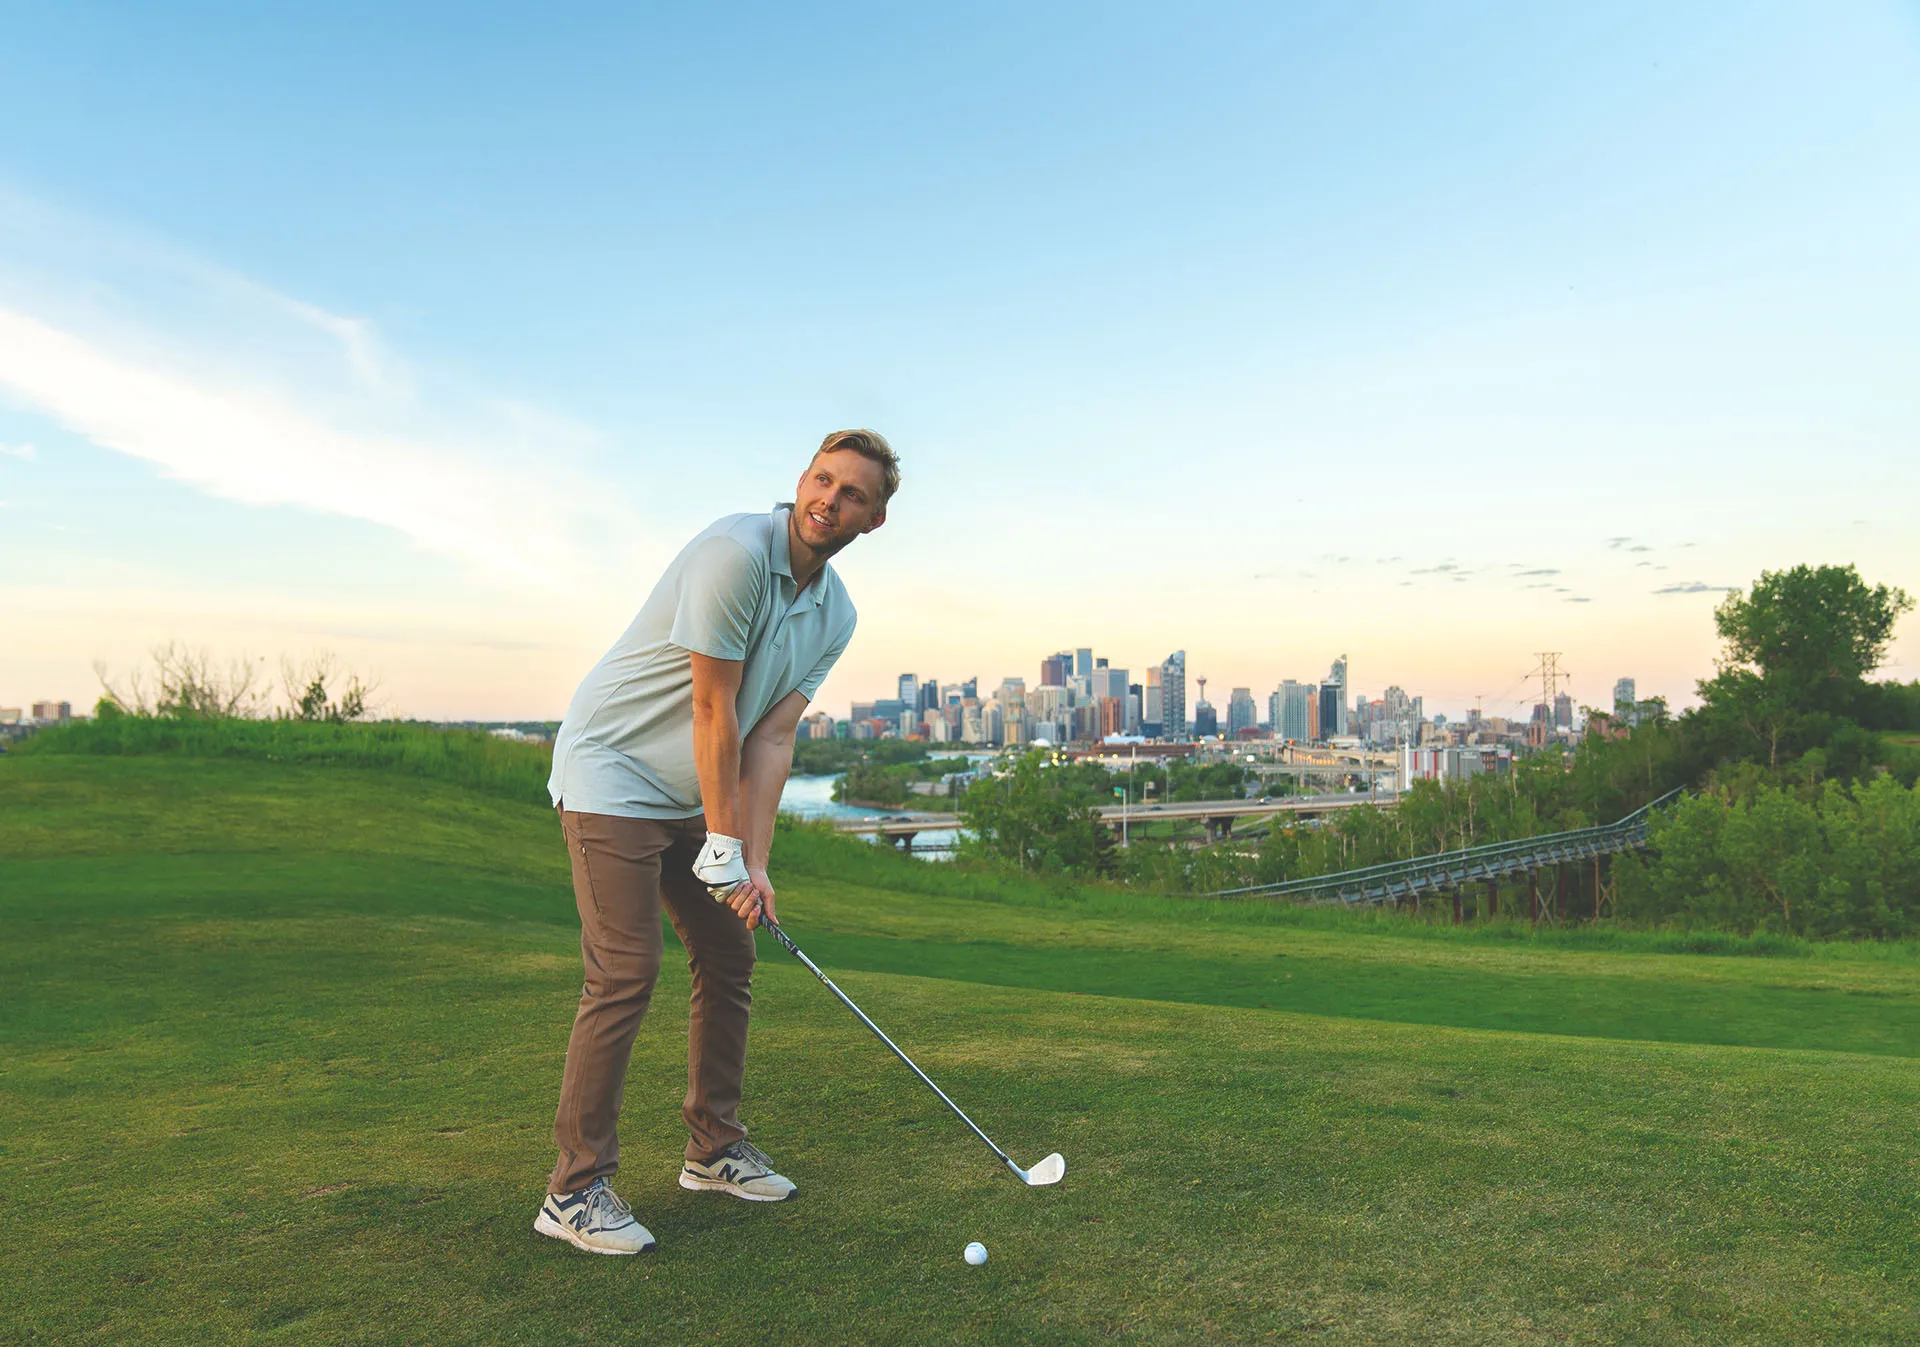 golfer taking a swing at Shaganappi Golf Course with the skyline in the background